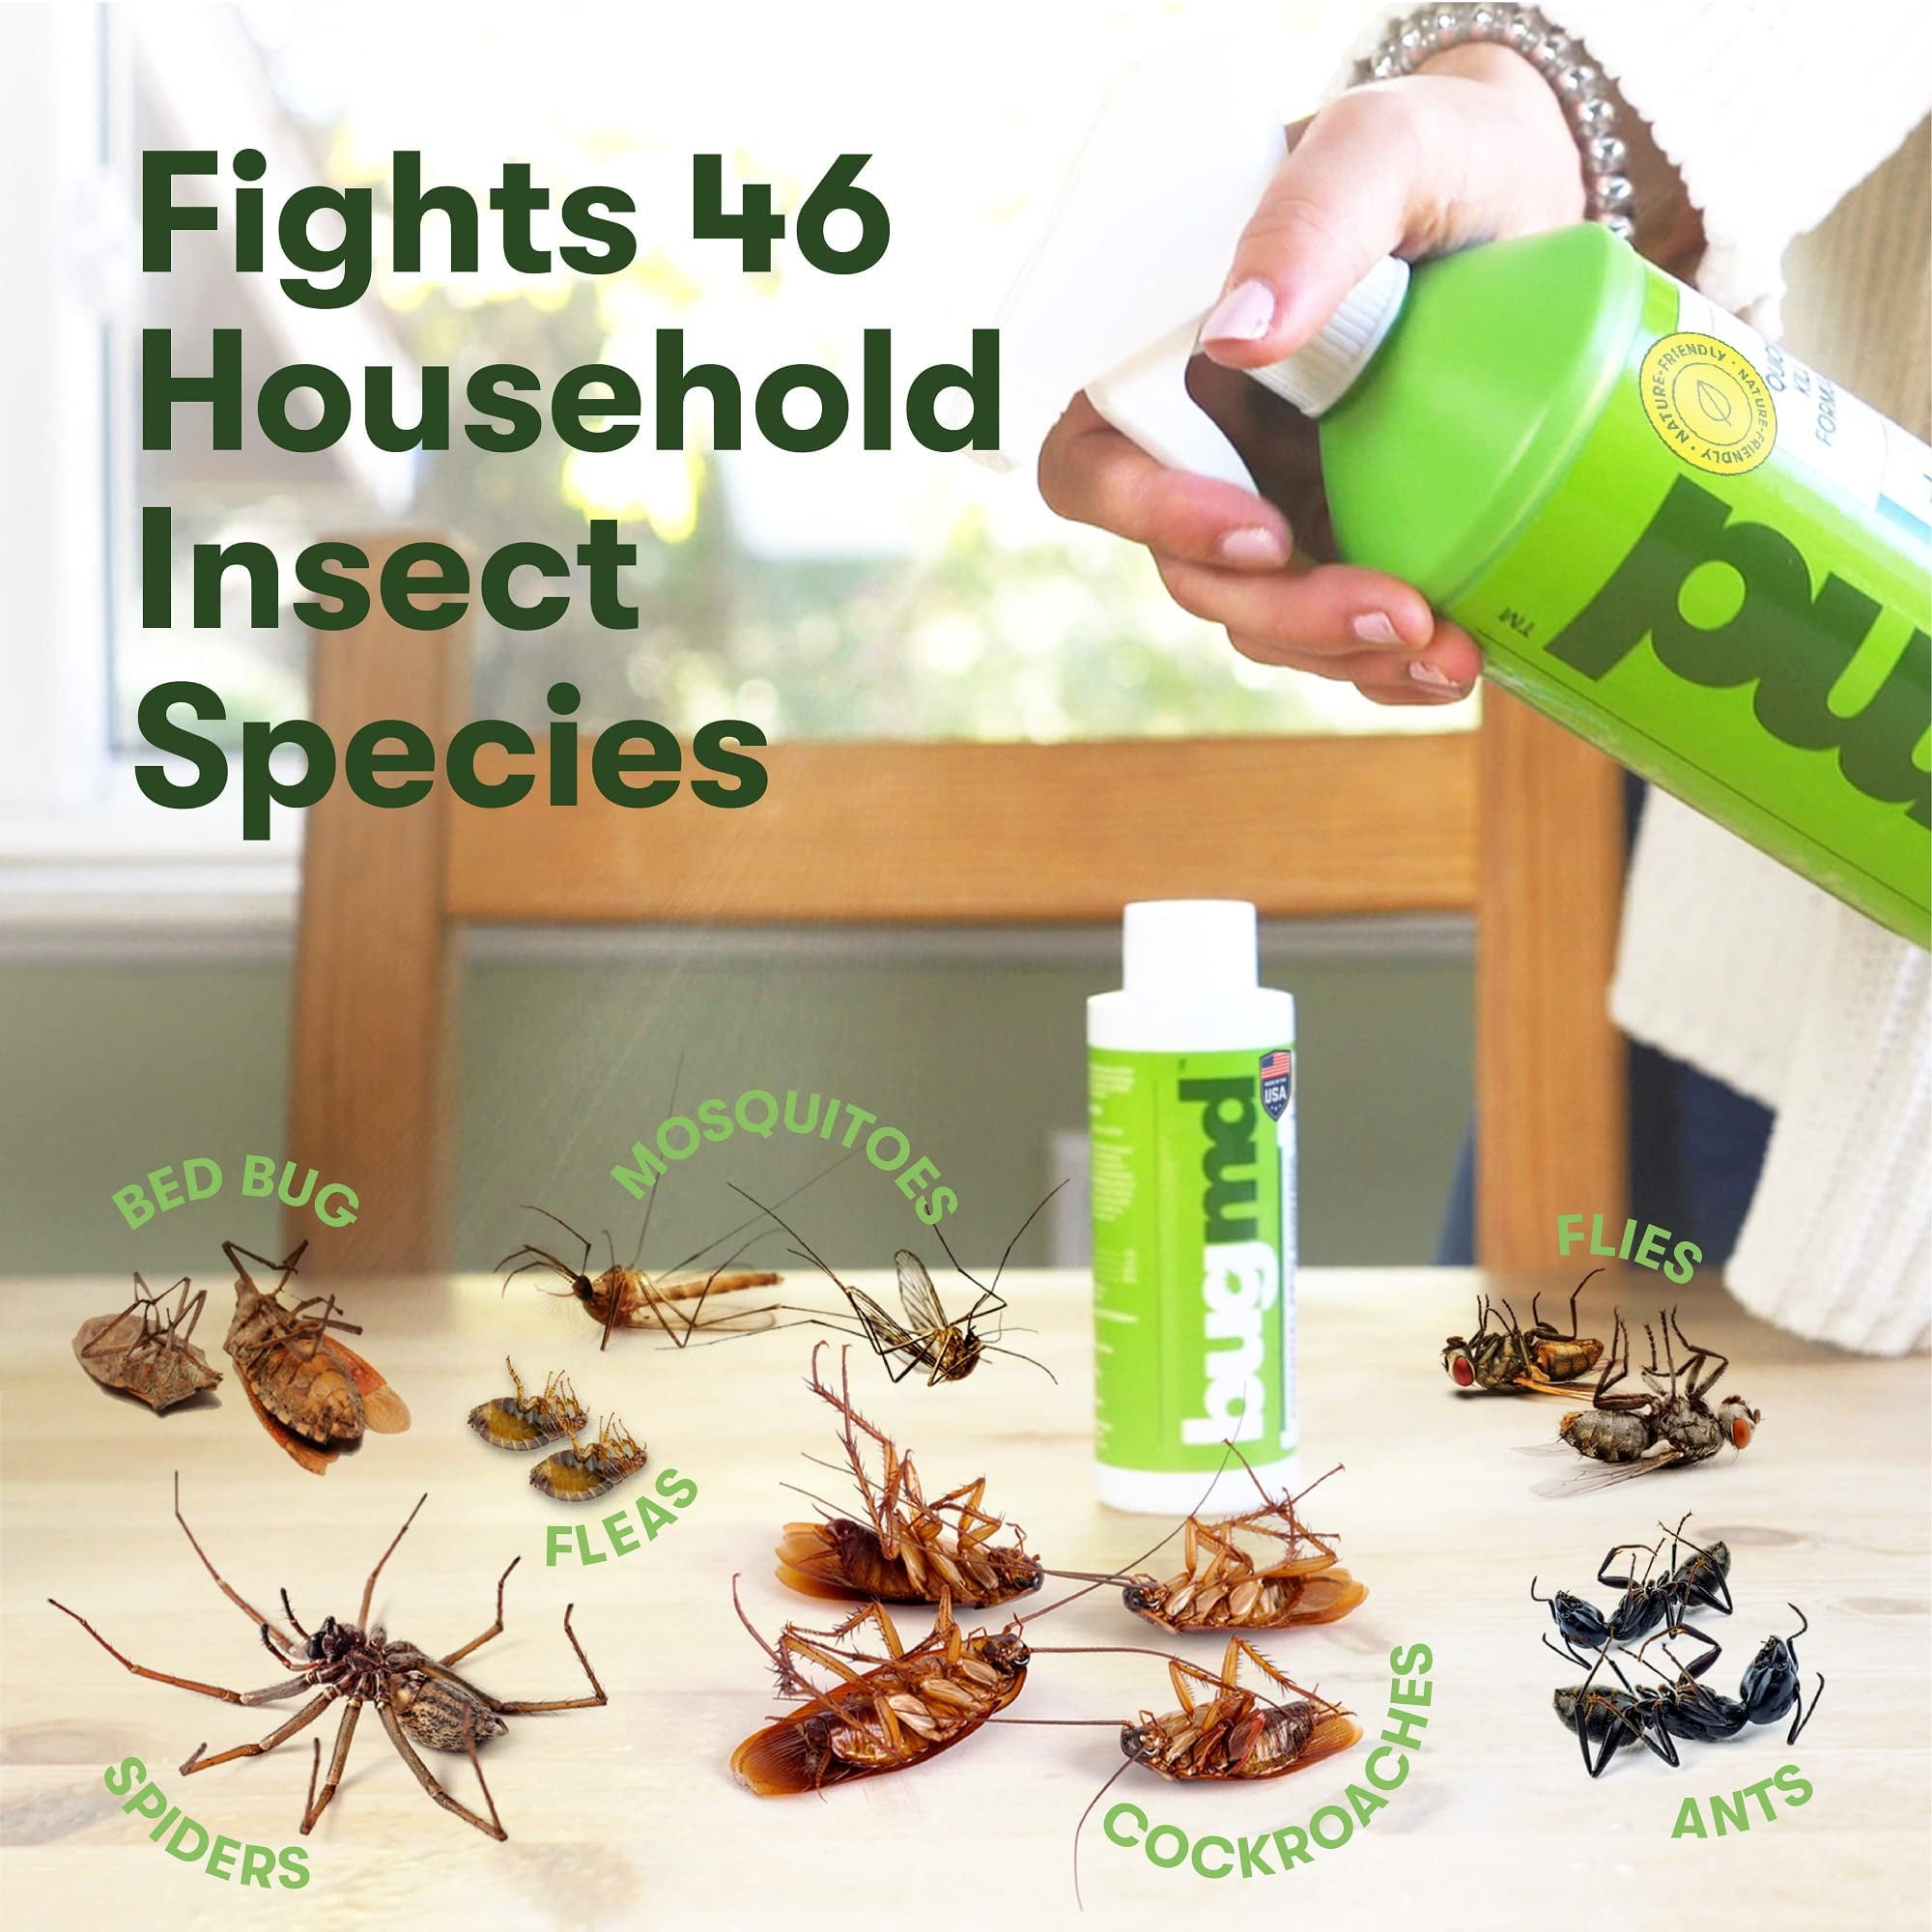  BugMD Mosquito Amigo Natural Plant-Based Pest Control Spray, Kills Mosquitoes, Fleas & Ticks, Spiders, Ants, Insects and More, Treats  Up to 5,000 Square Feet